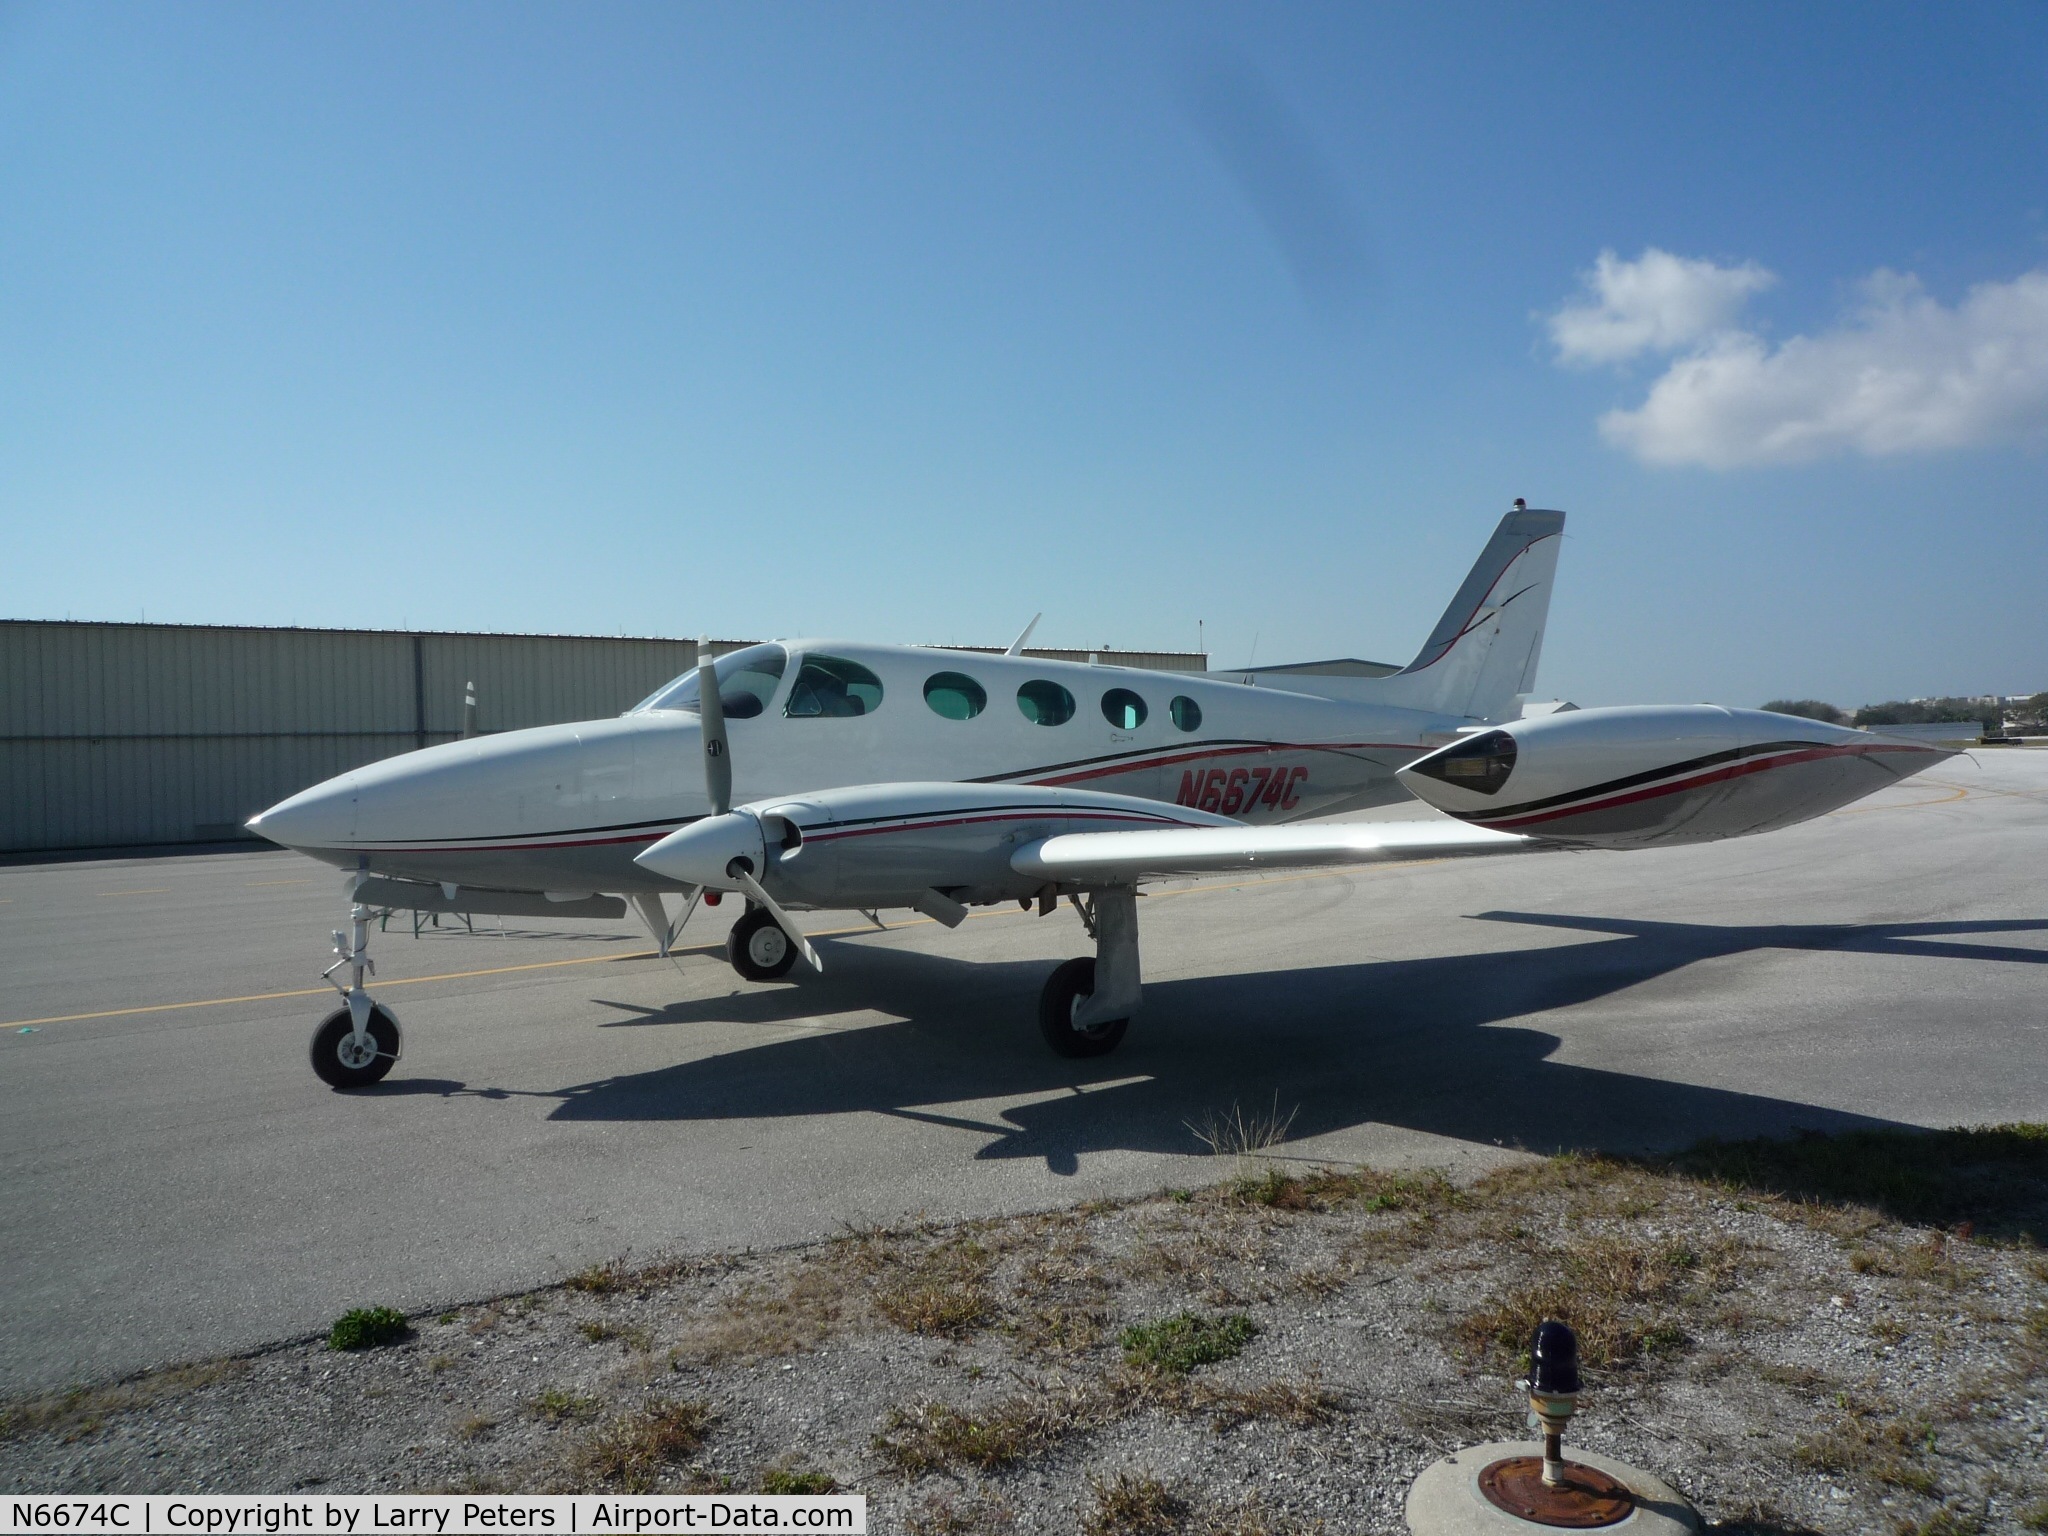 N6674C, 1980 Cessna 335 C/N 335-0058, At Albert Whitted Airport Florida, 2013